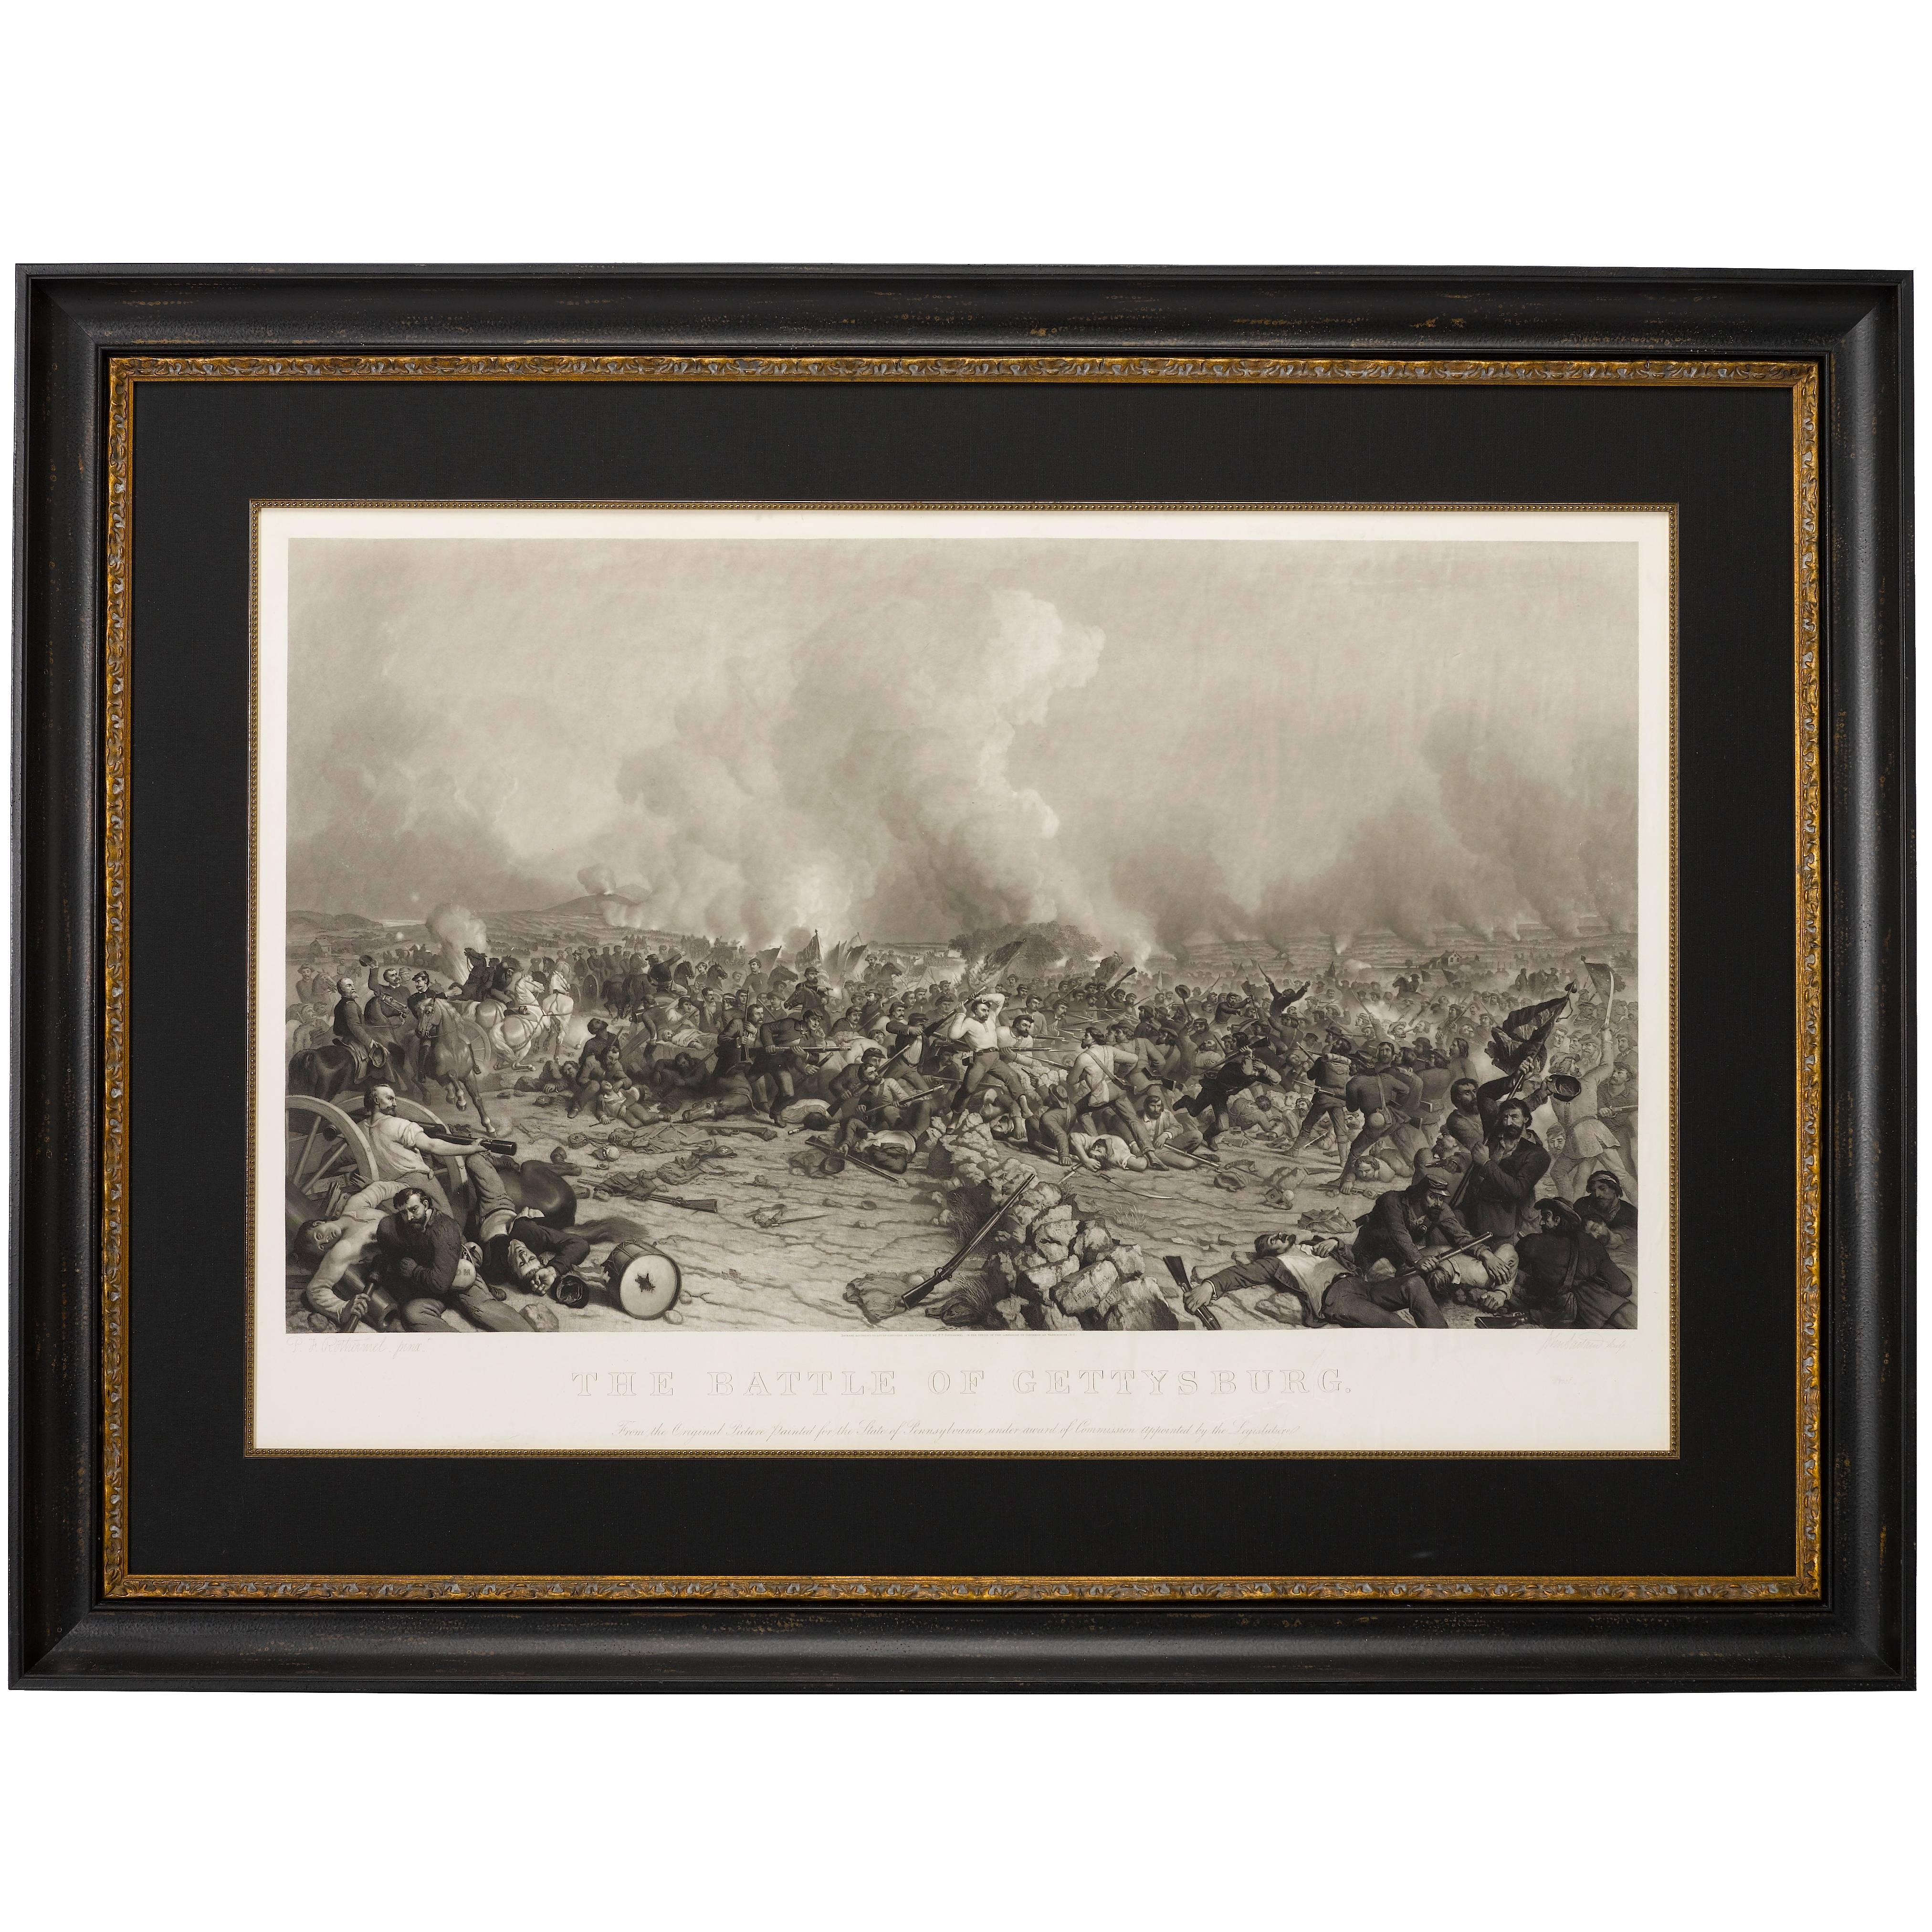 "Battle of Gettysburg" by Peter F. Rothermel, Antique Engraving, 1872